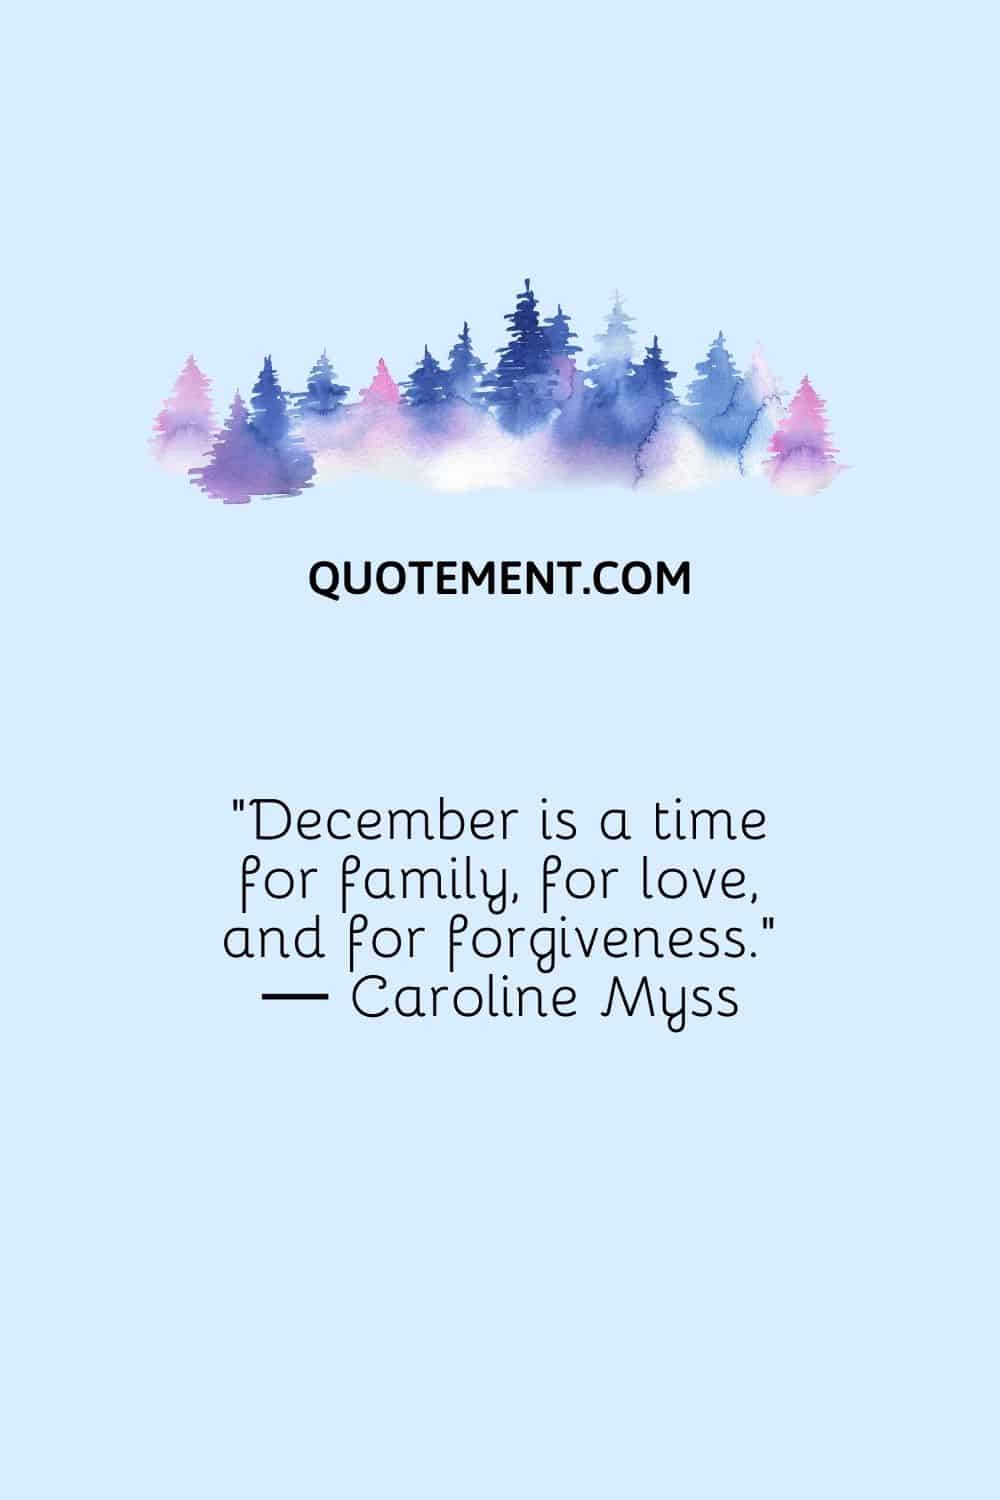 “December is a time for family, for love, and for forgiveness.” ― Caroline Myss